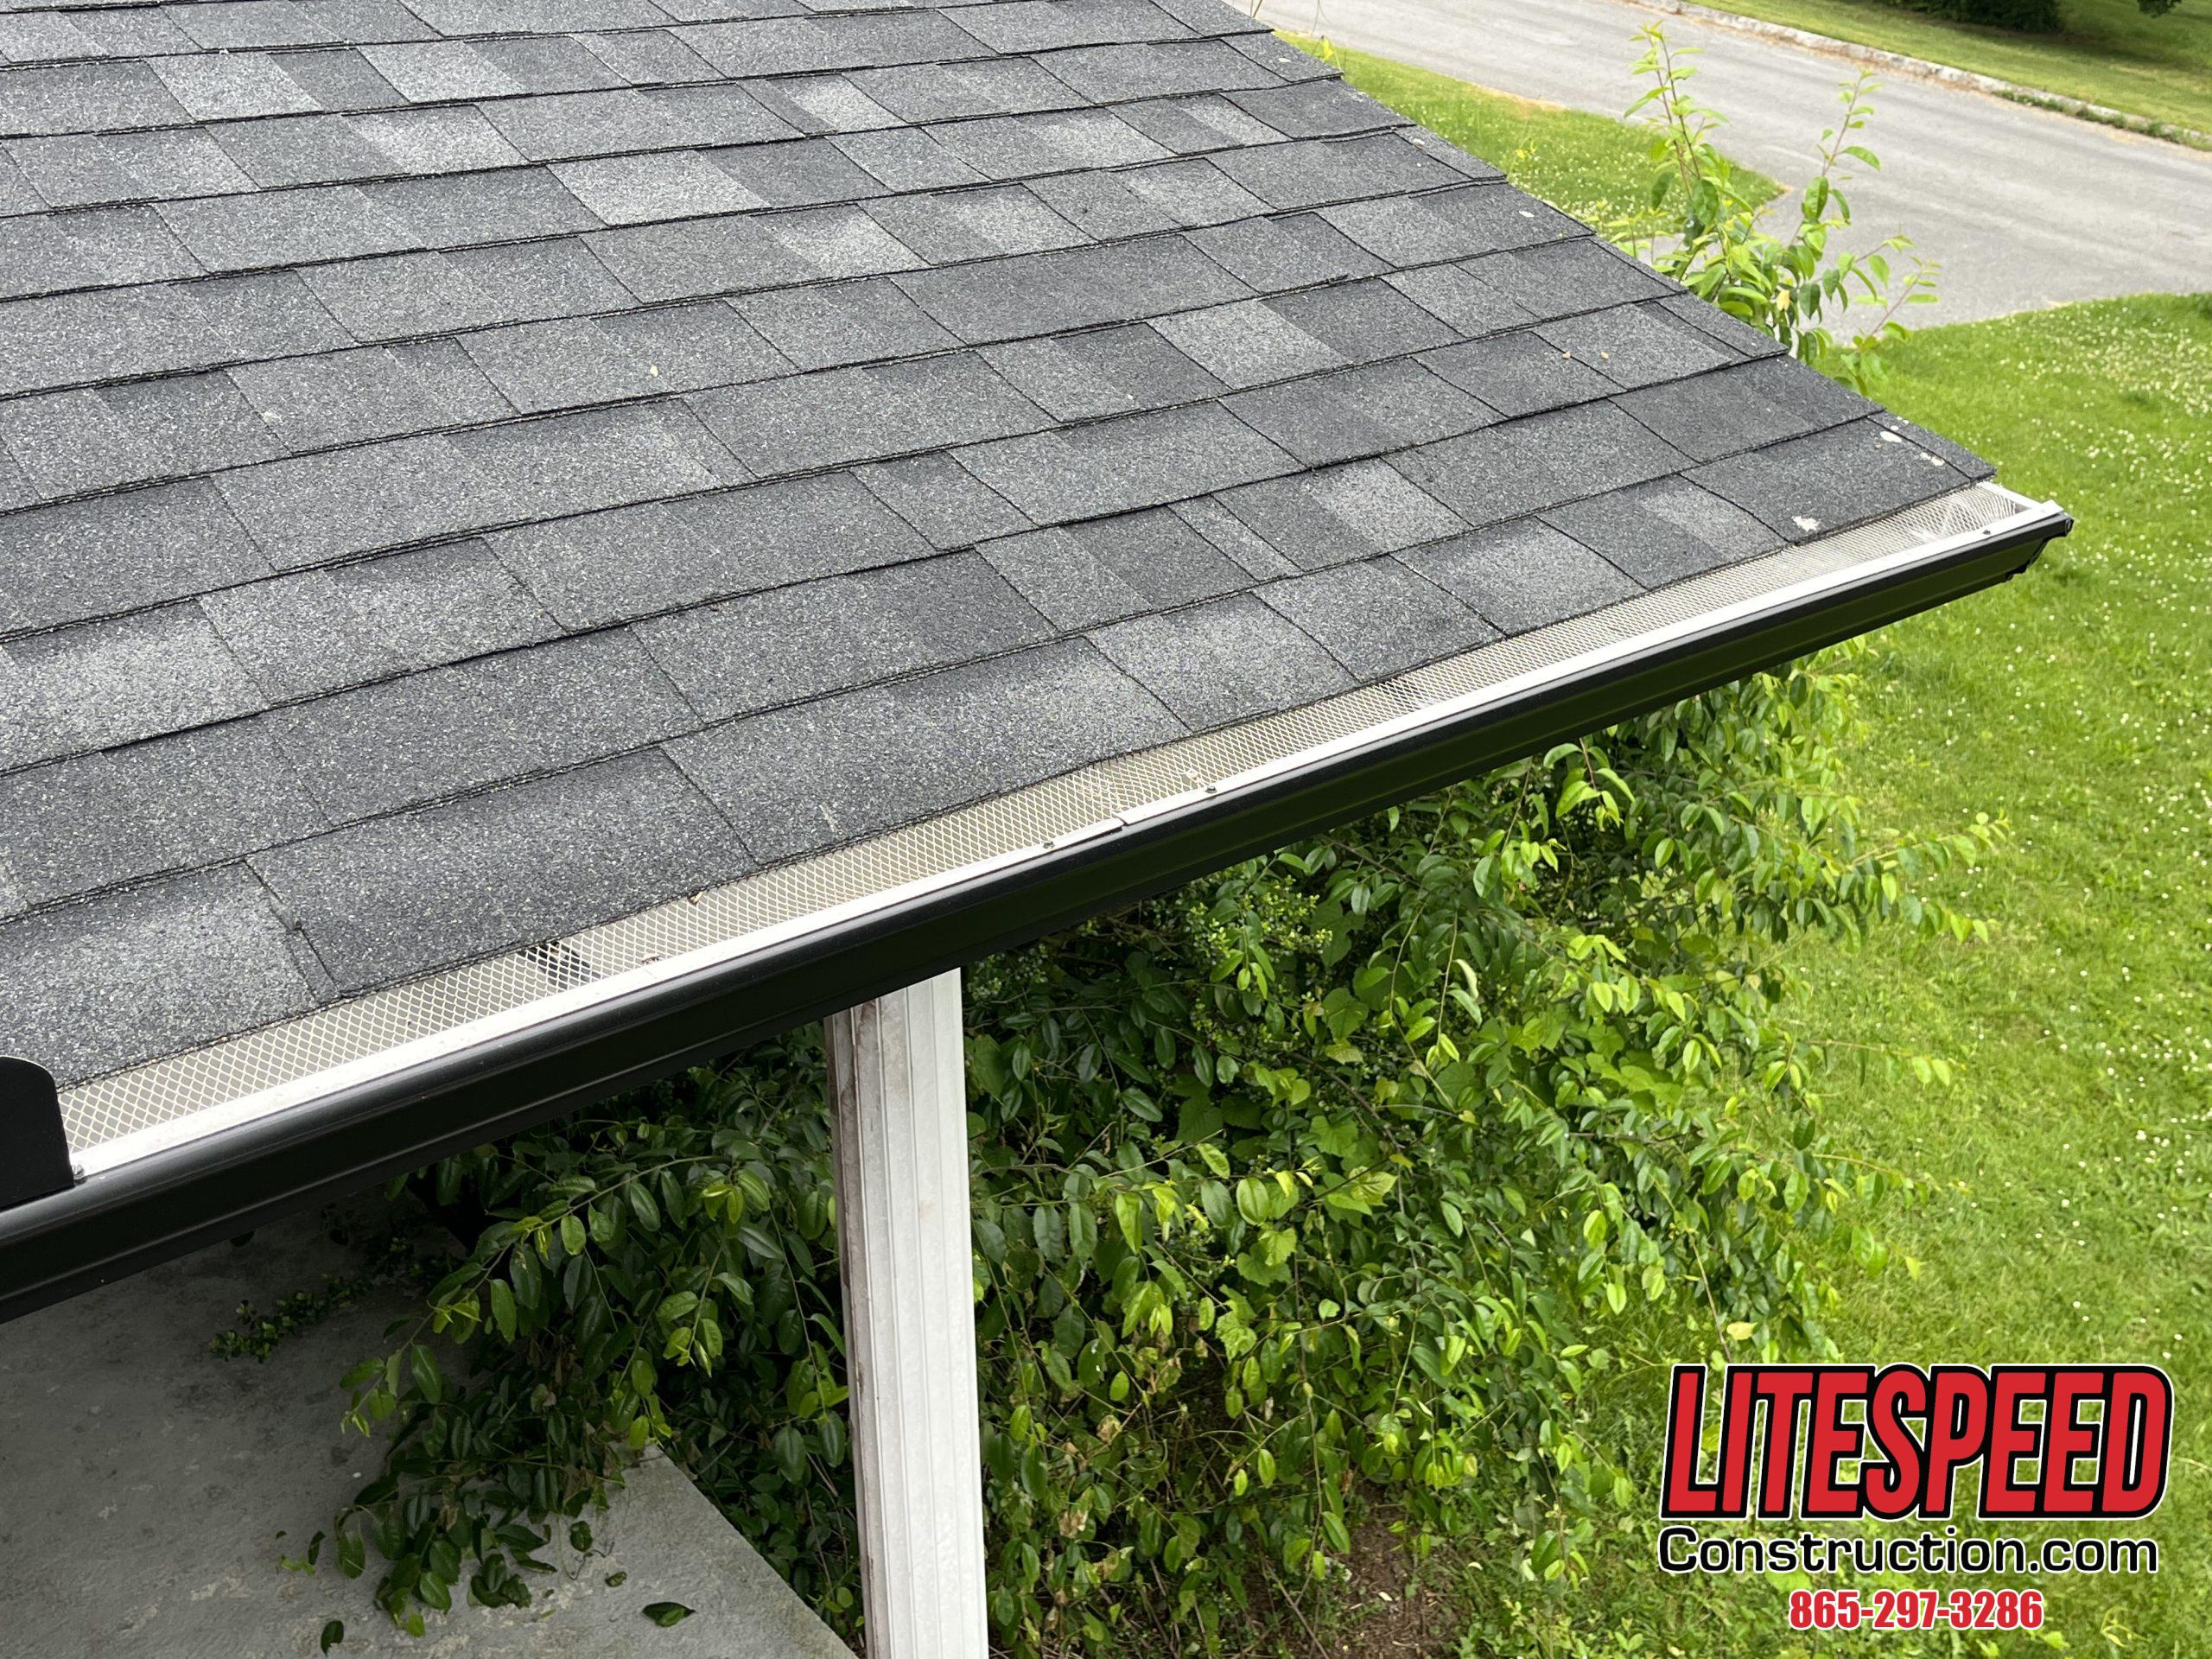 This is a picture of new black five inch gutters 